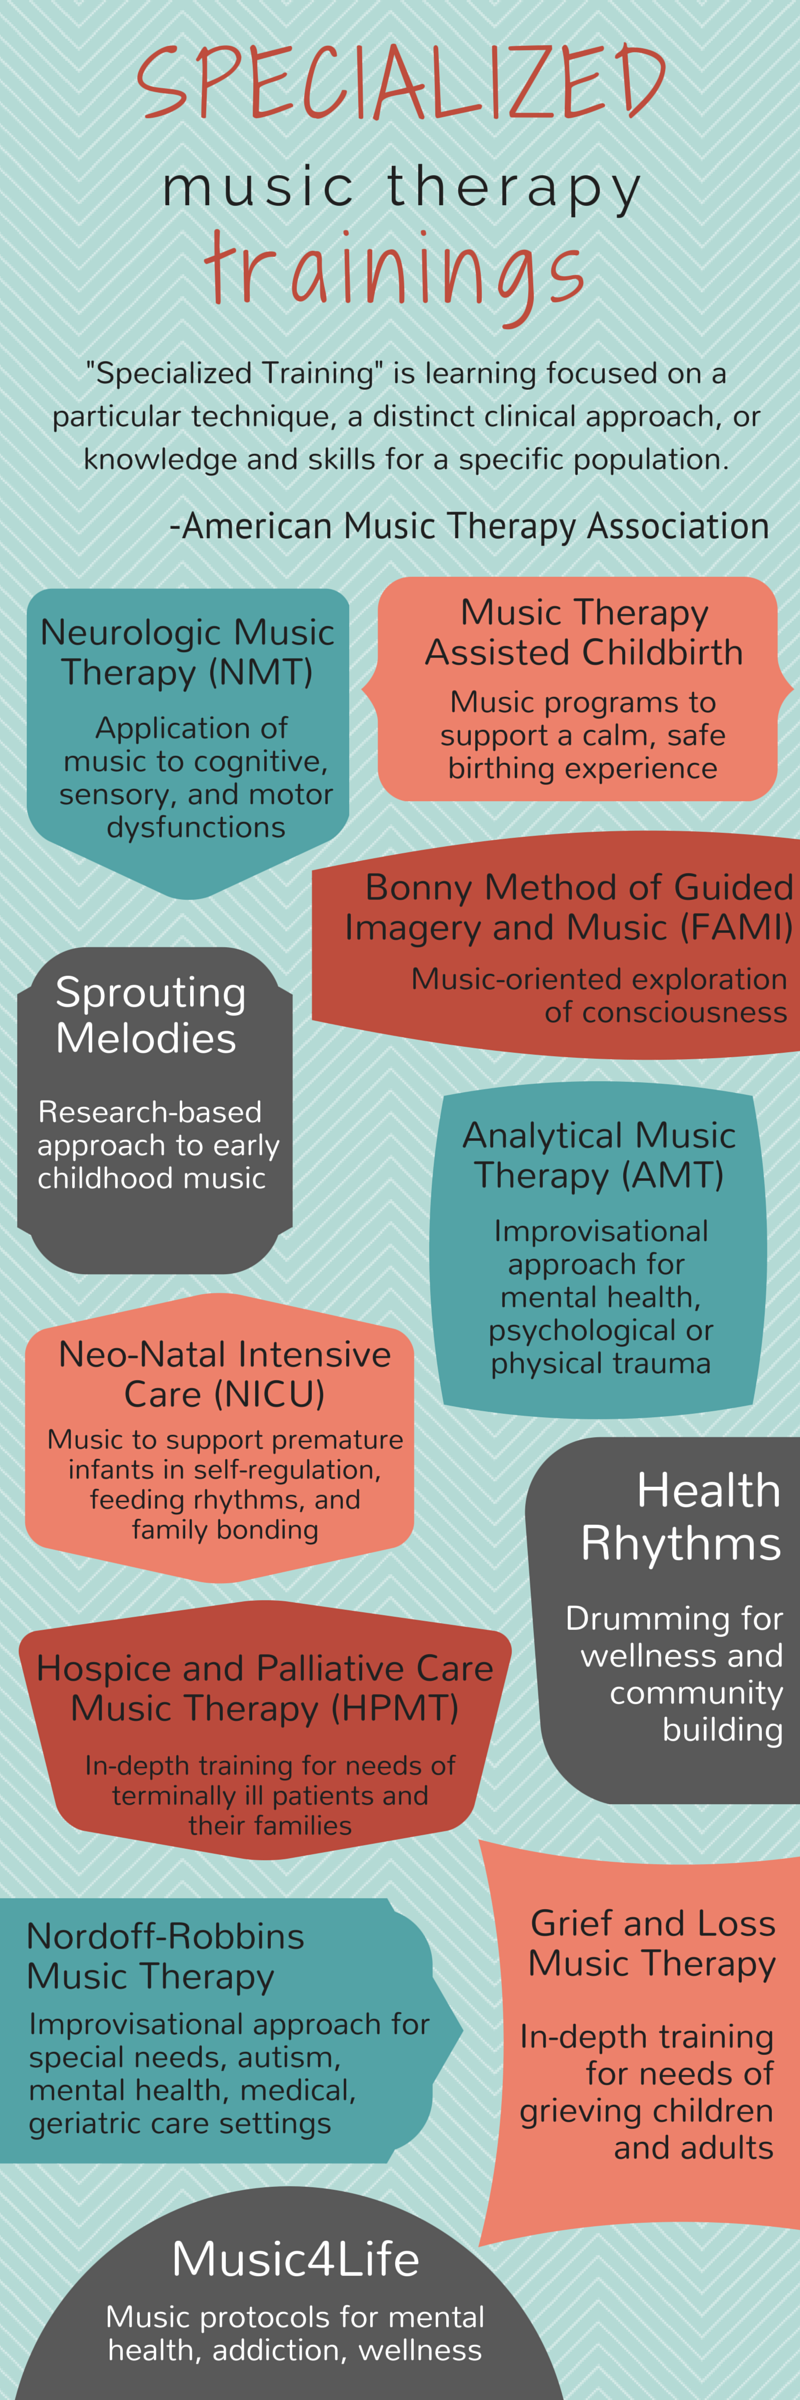 List of Specialized Music Therapy Trainings (Infographic)